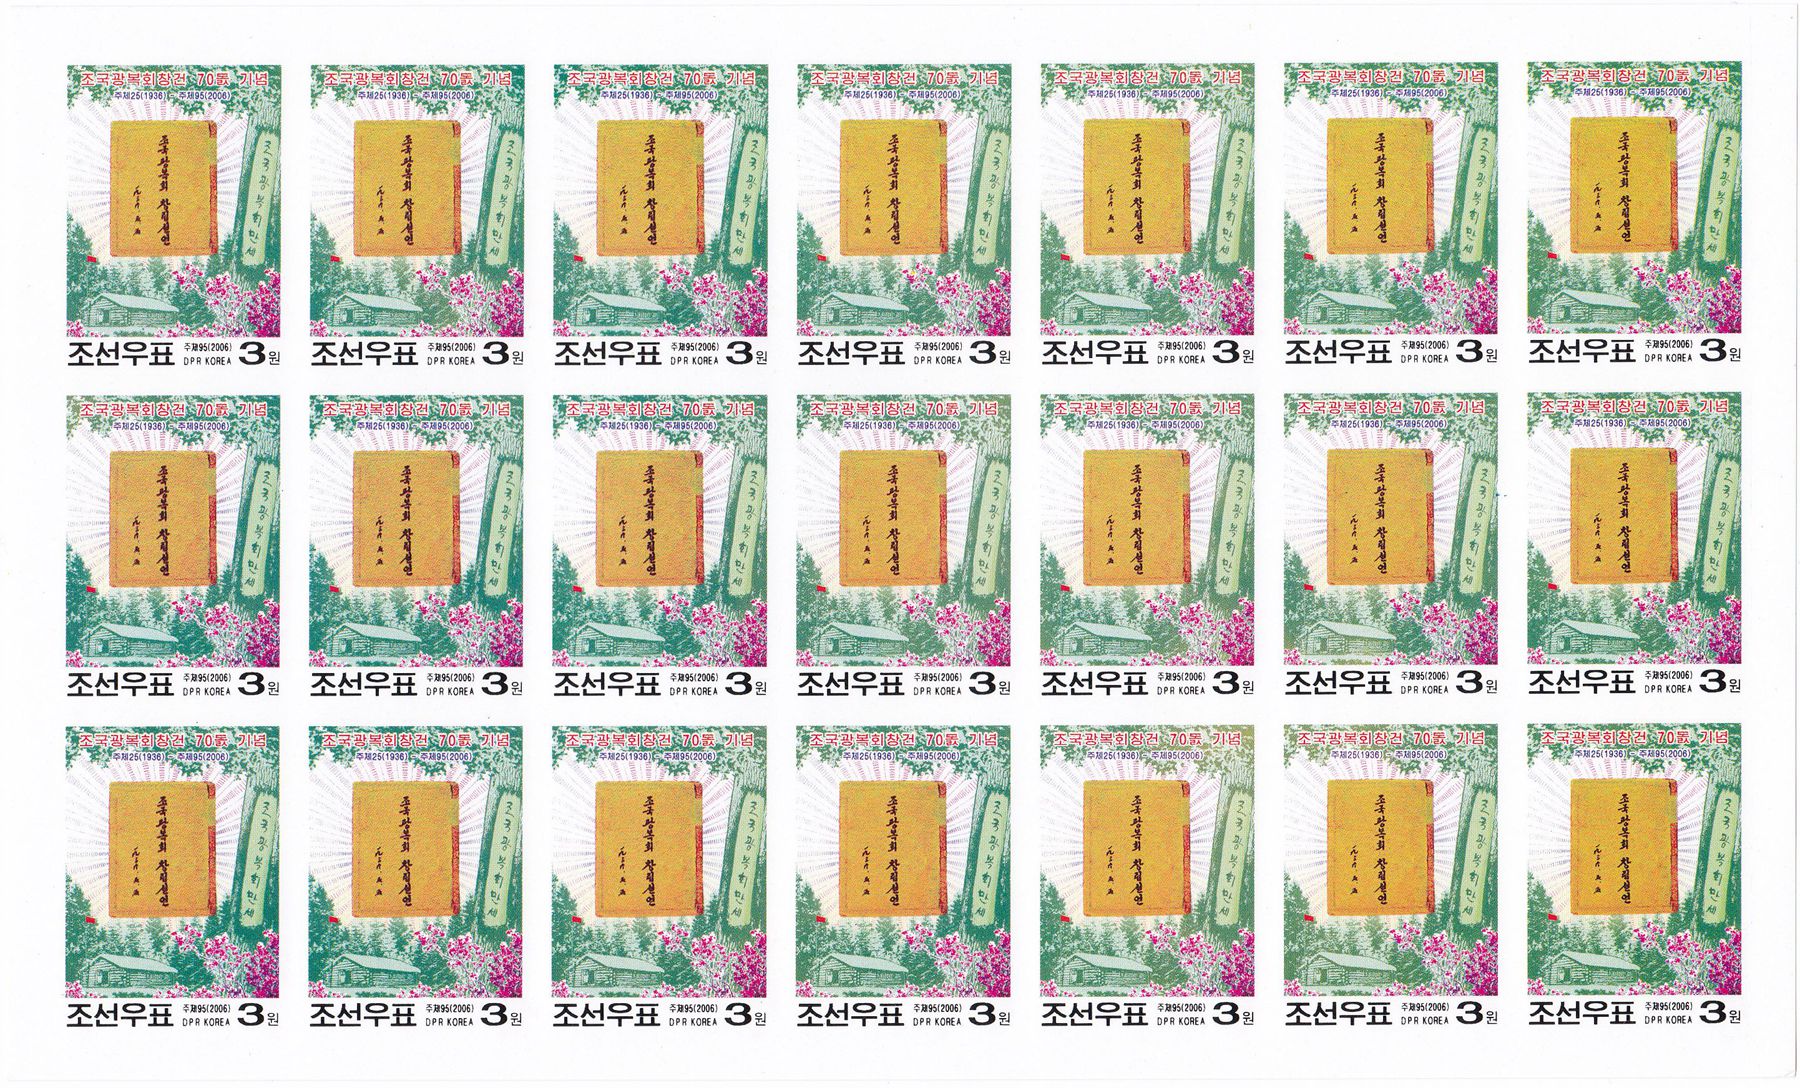 L4618, Korea "Association of Fatherland", Sheet of 21 Pcs Stamps, 2006 Imperforate - Click Image to Close